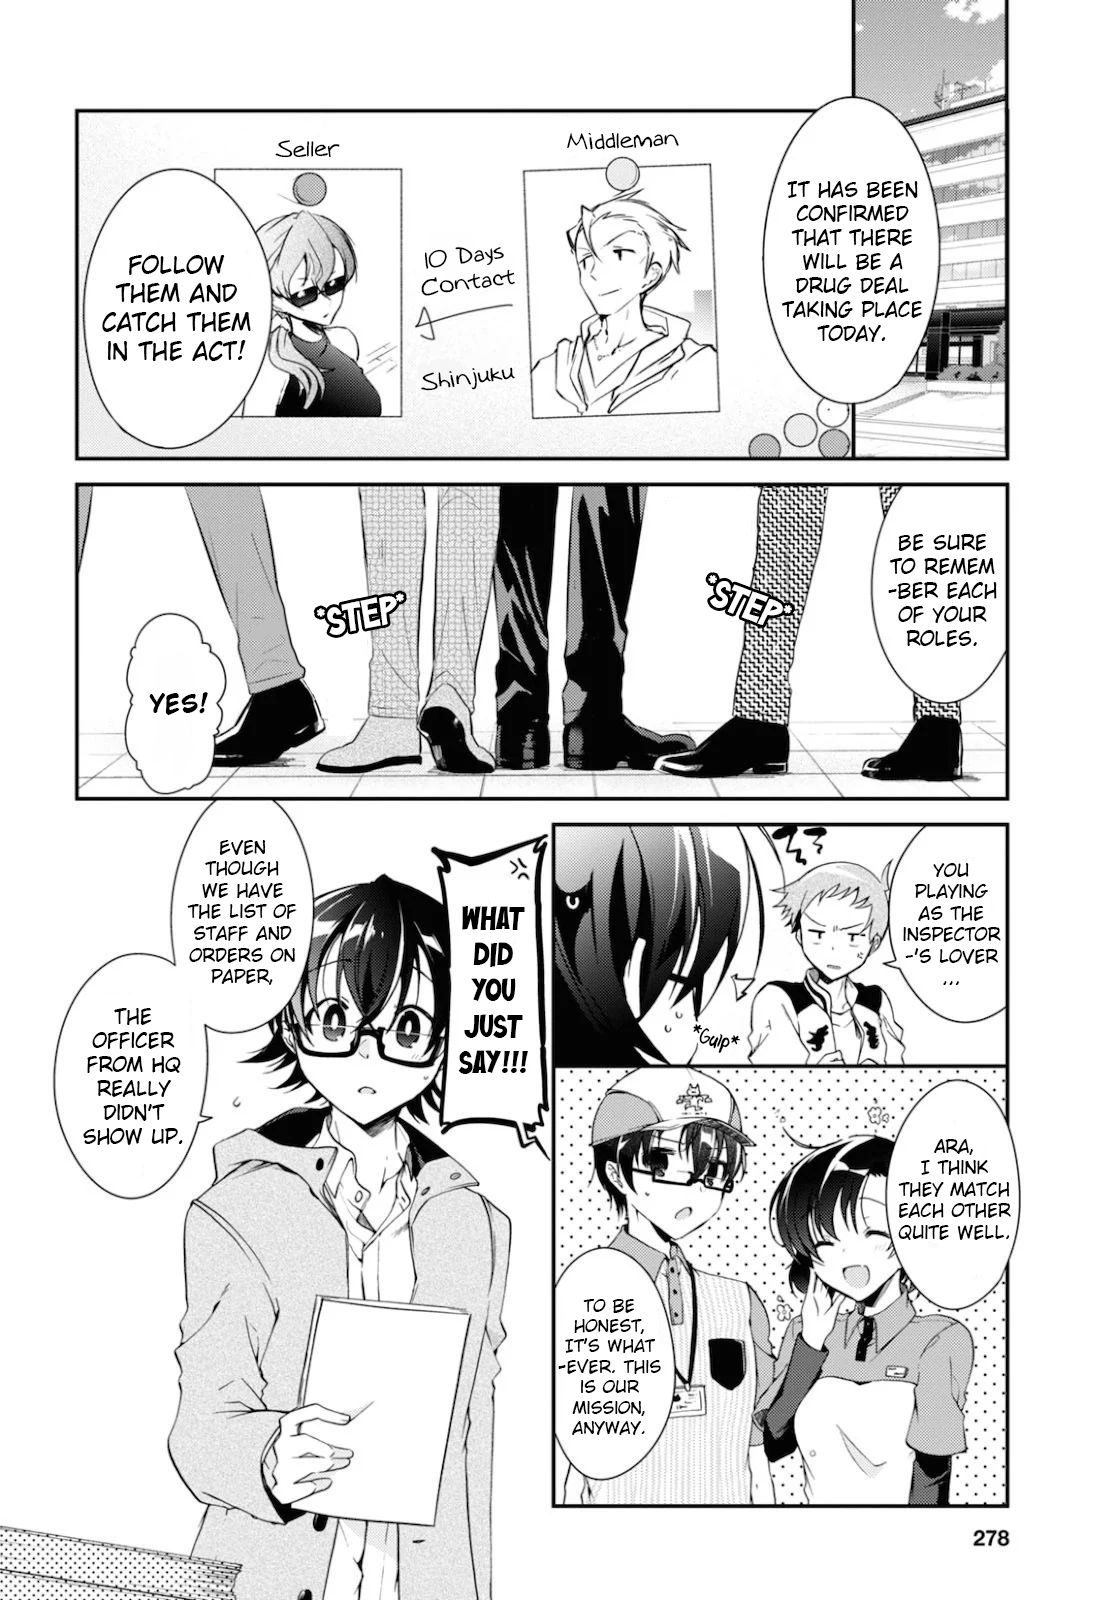 Isshiki-san Wants to Know About Love. - chapter 5 - #2